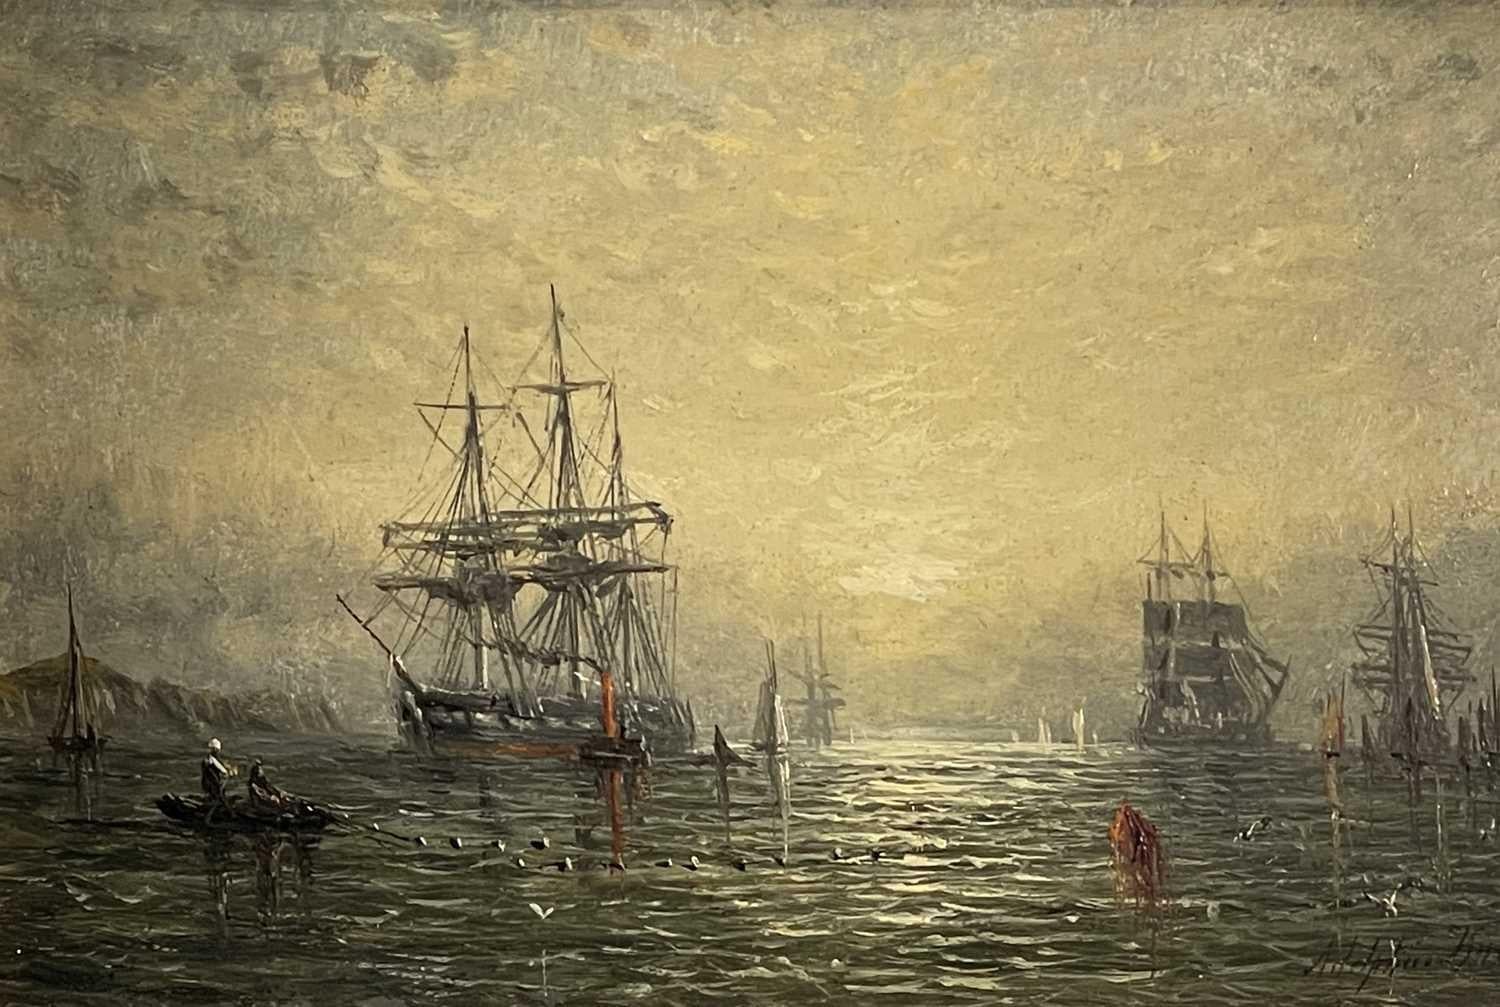 Adolphus Knell Landscape Painting - "19th Century Shipping off the Coast at Sunset" small Oil Painting